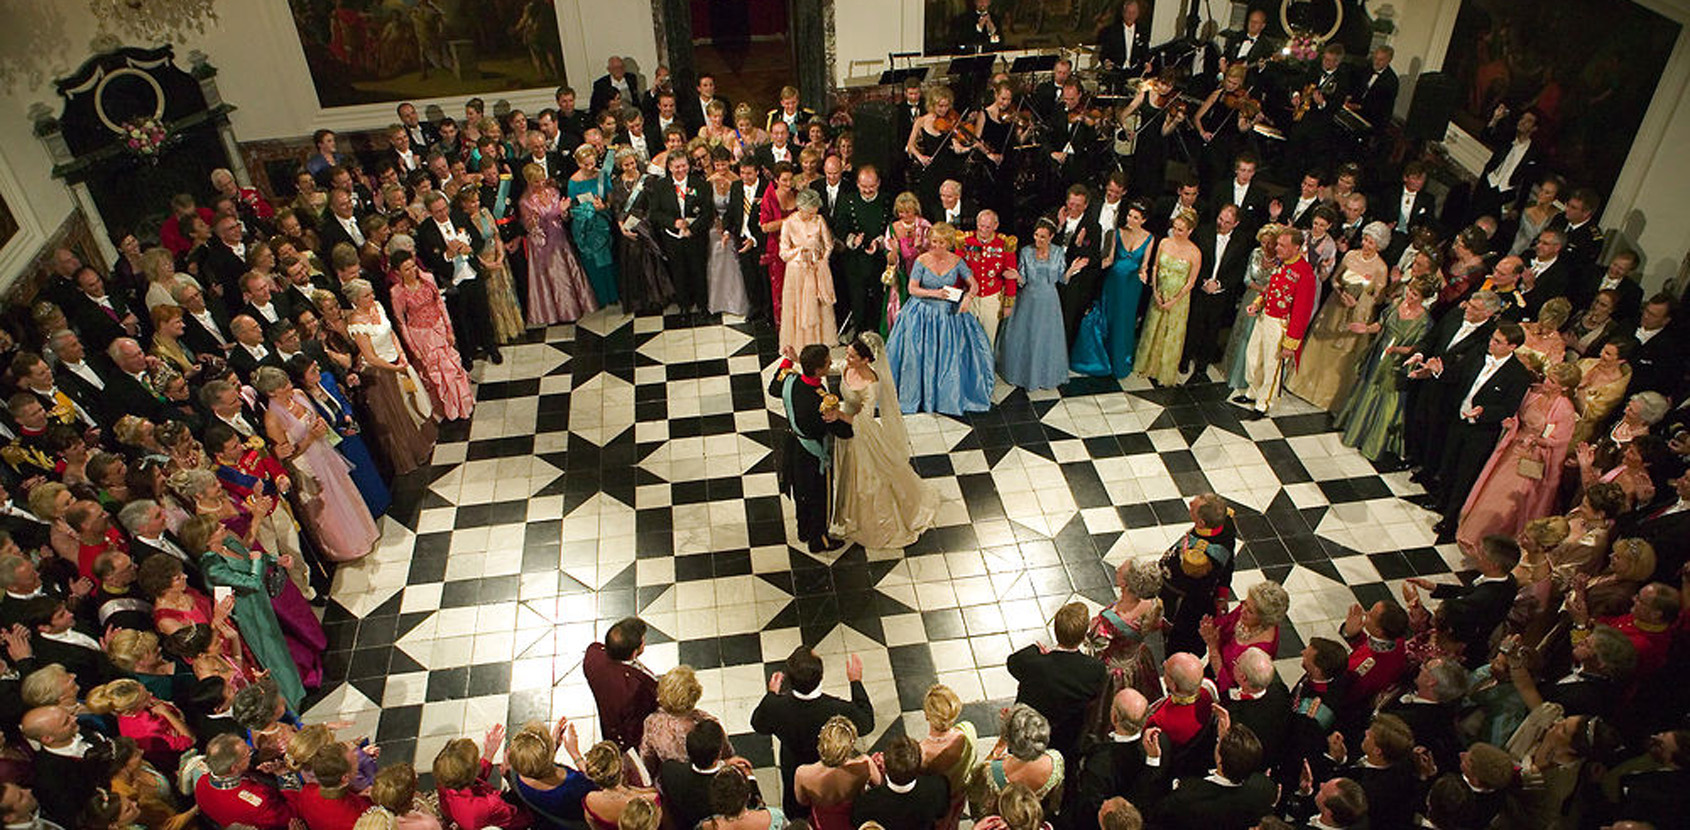 The Royal Couple danced the bridal waltz in the Dome Hall of the palace. Photo: Scanpix / Jørgen Jessen